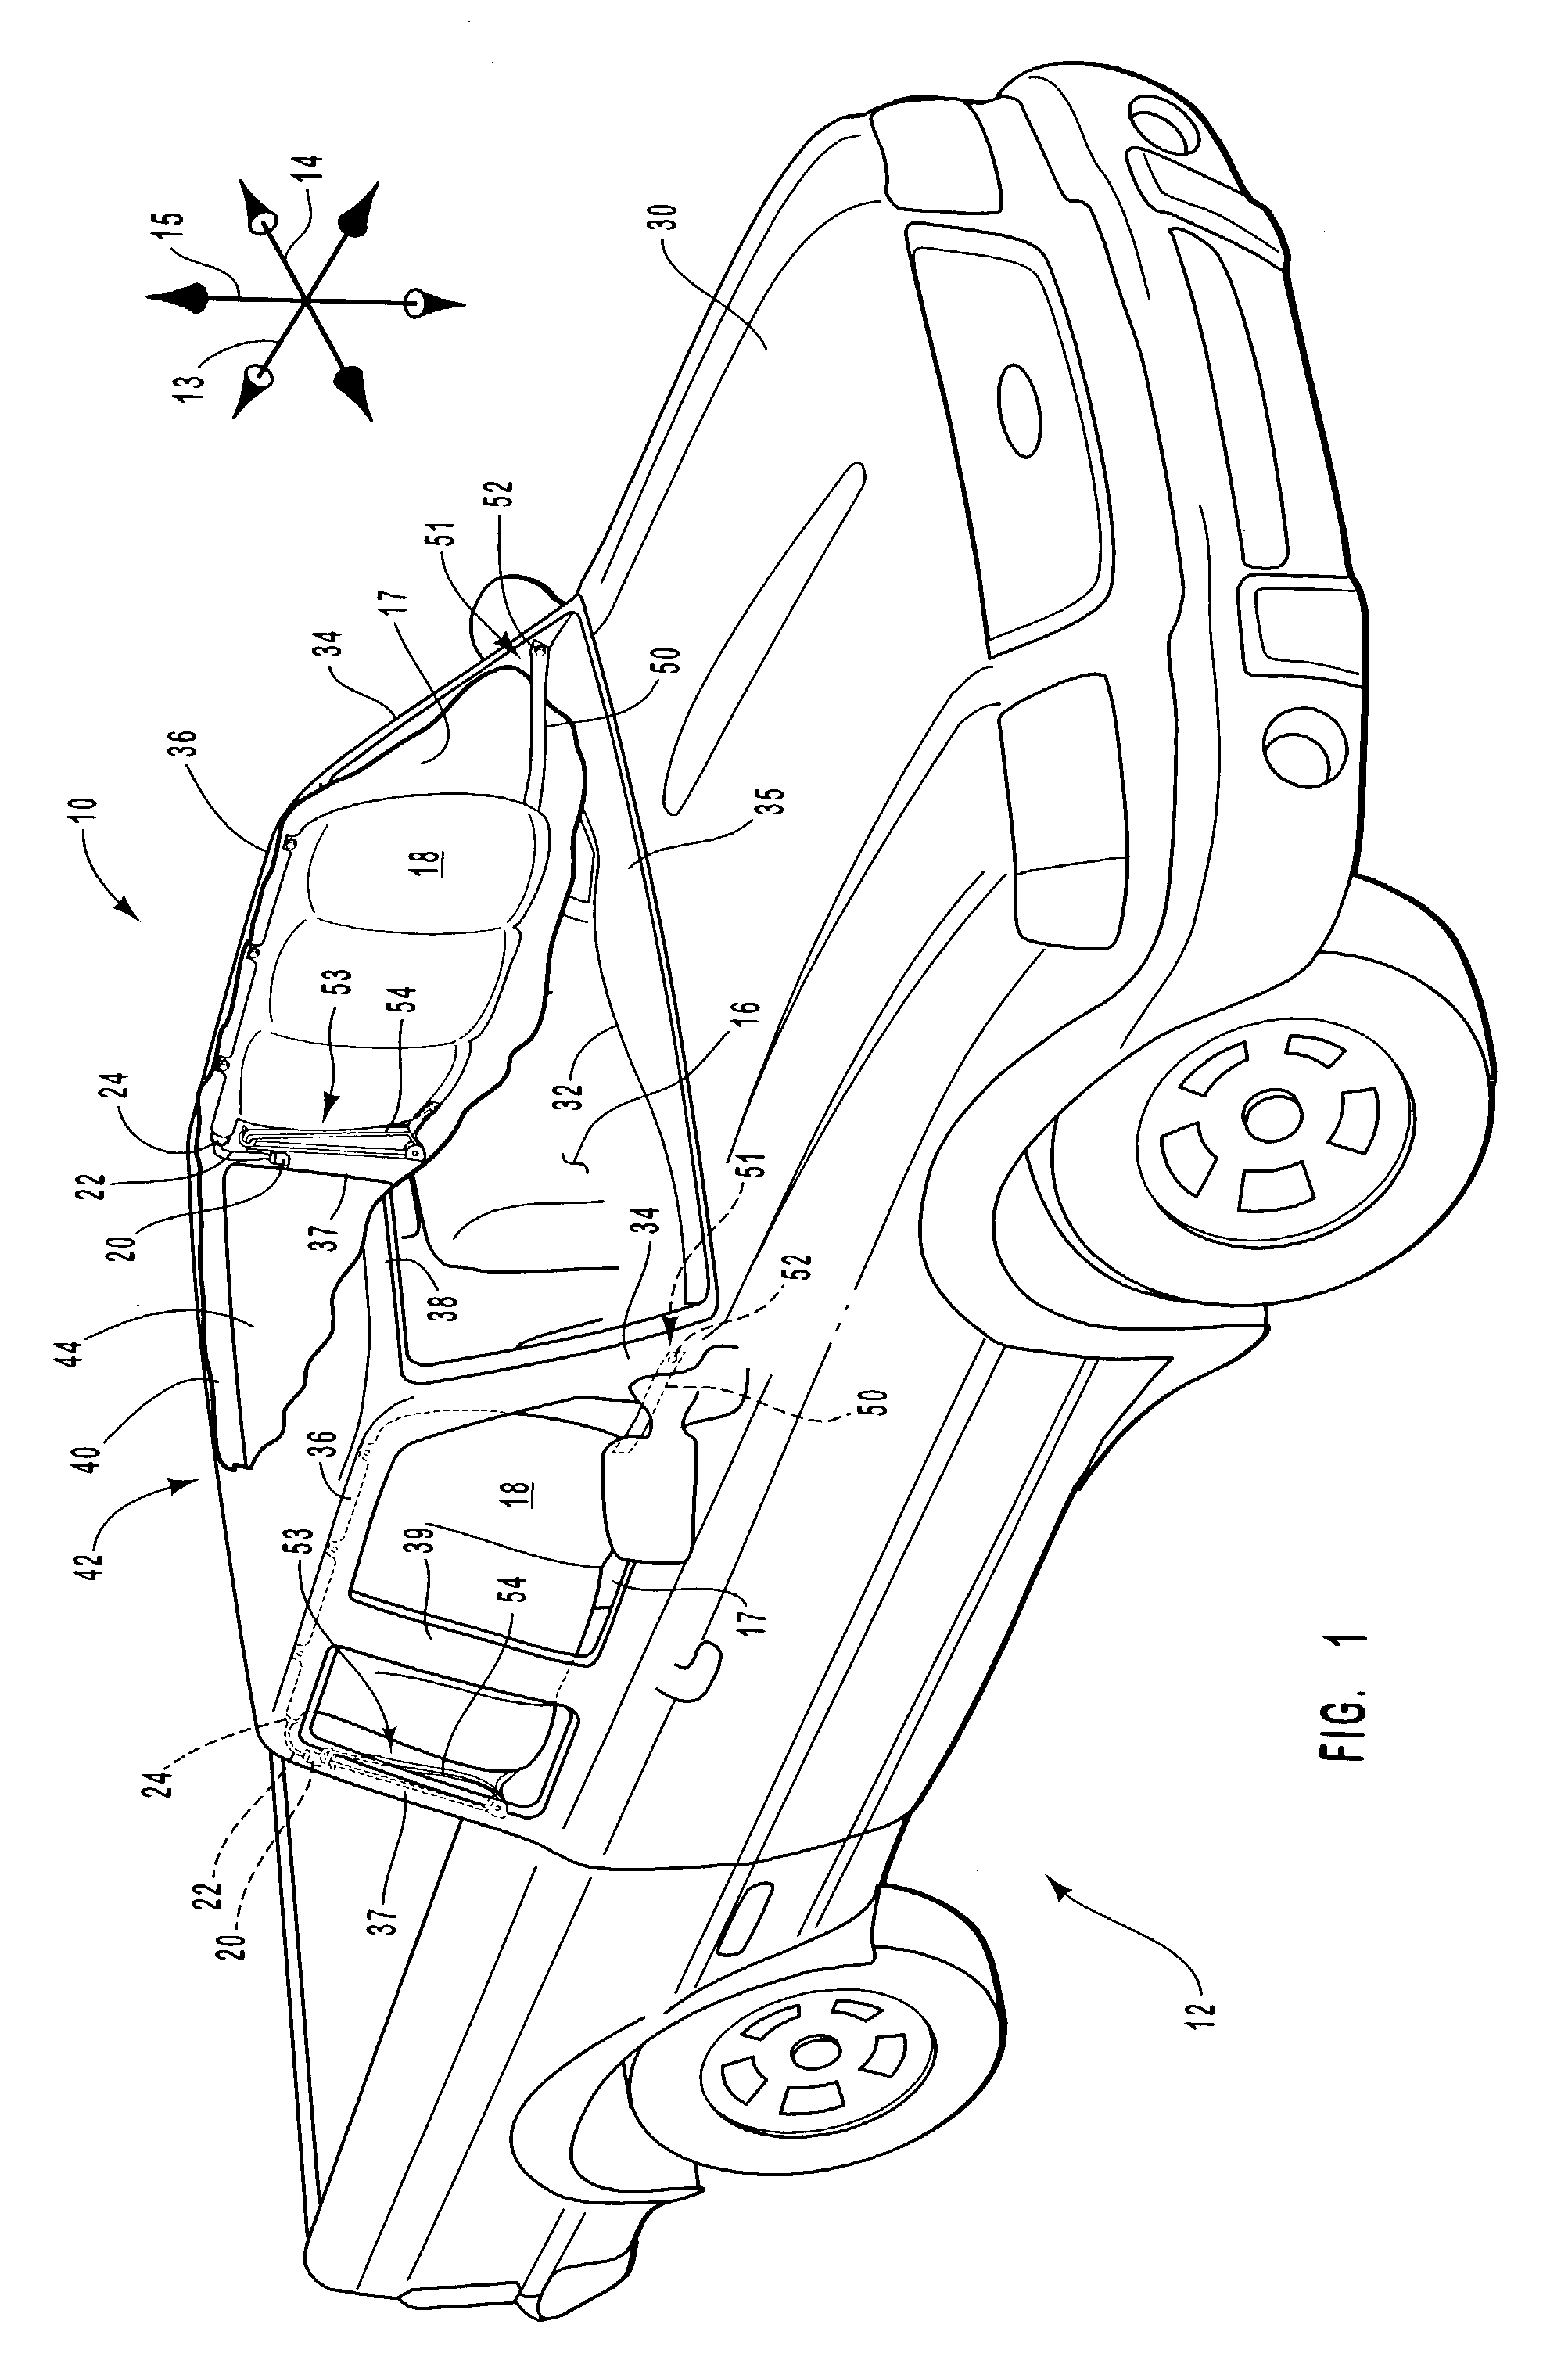 Compact tethering system and method for an inflatable curtain